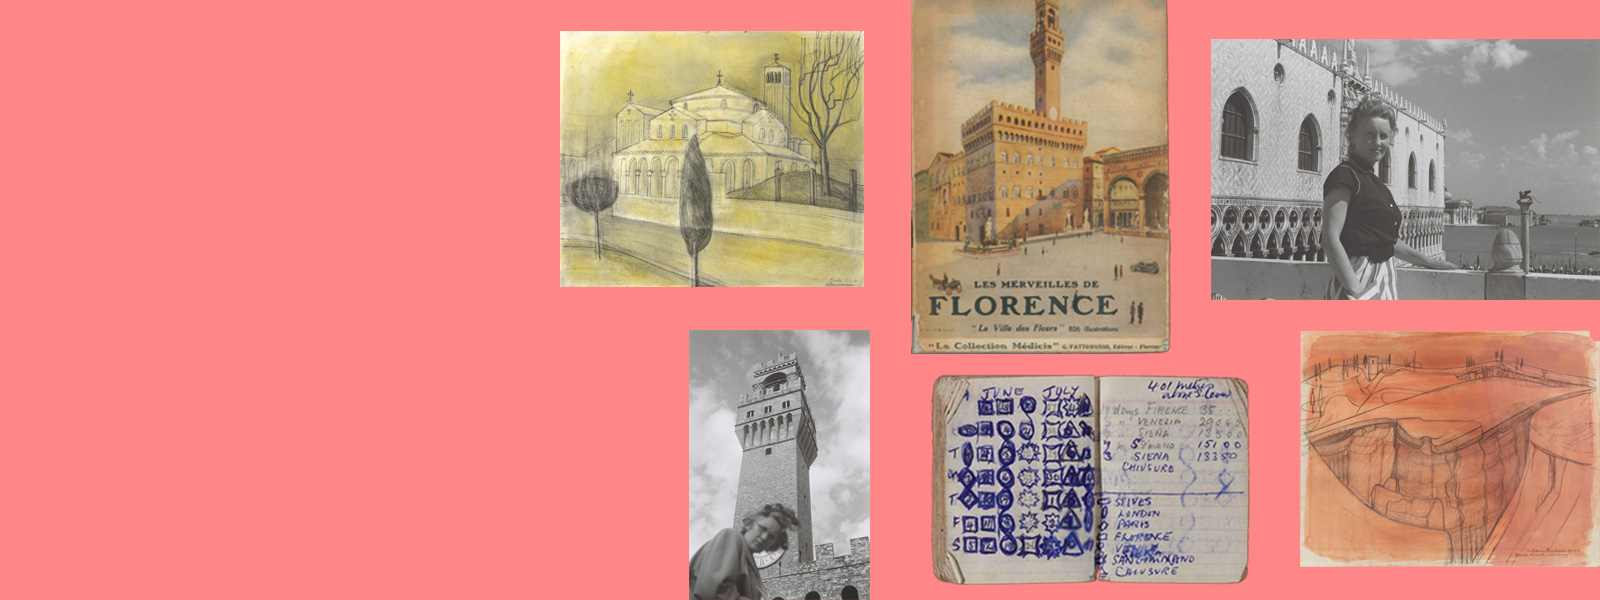 A selection of artworks and archive material from Italy